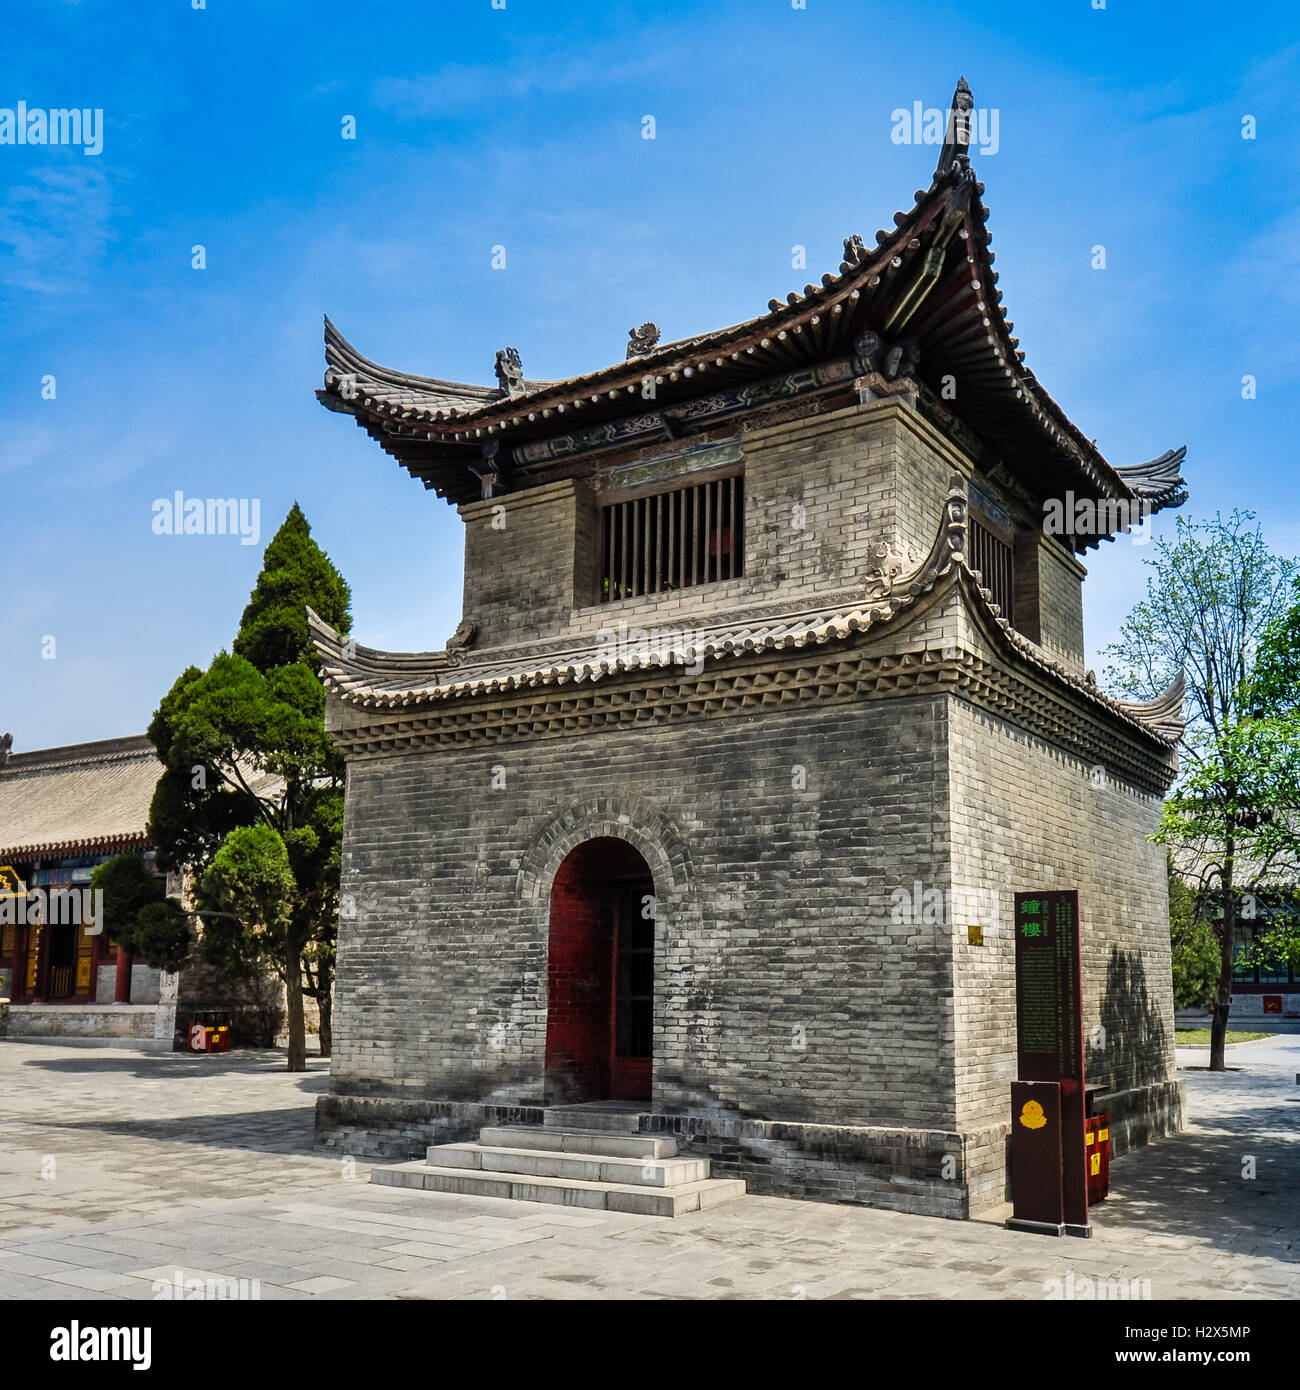 Pagoda-Style Bell Tower at Entrance to Big Wild Goose Pagoda Compound - Xian, China Stock Photo